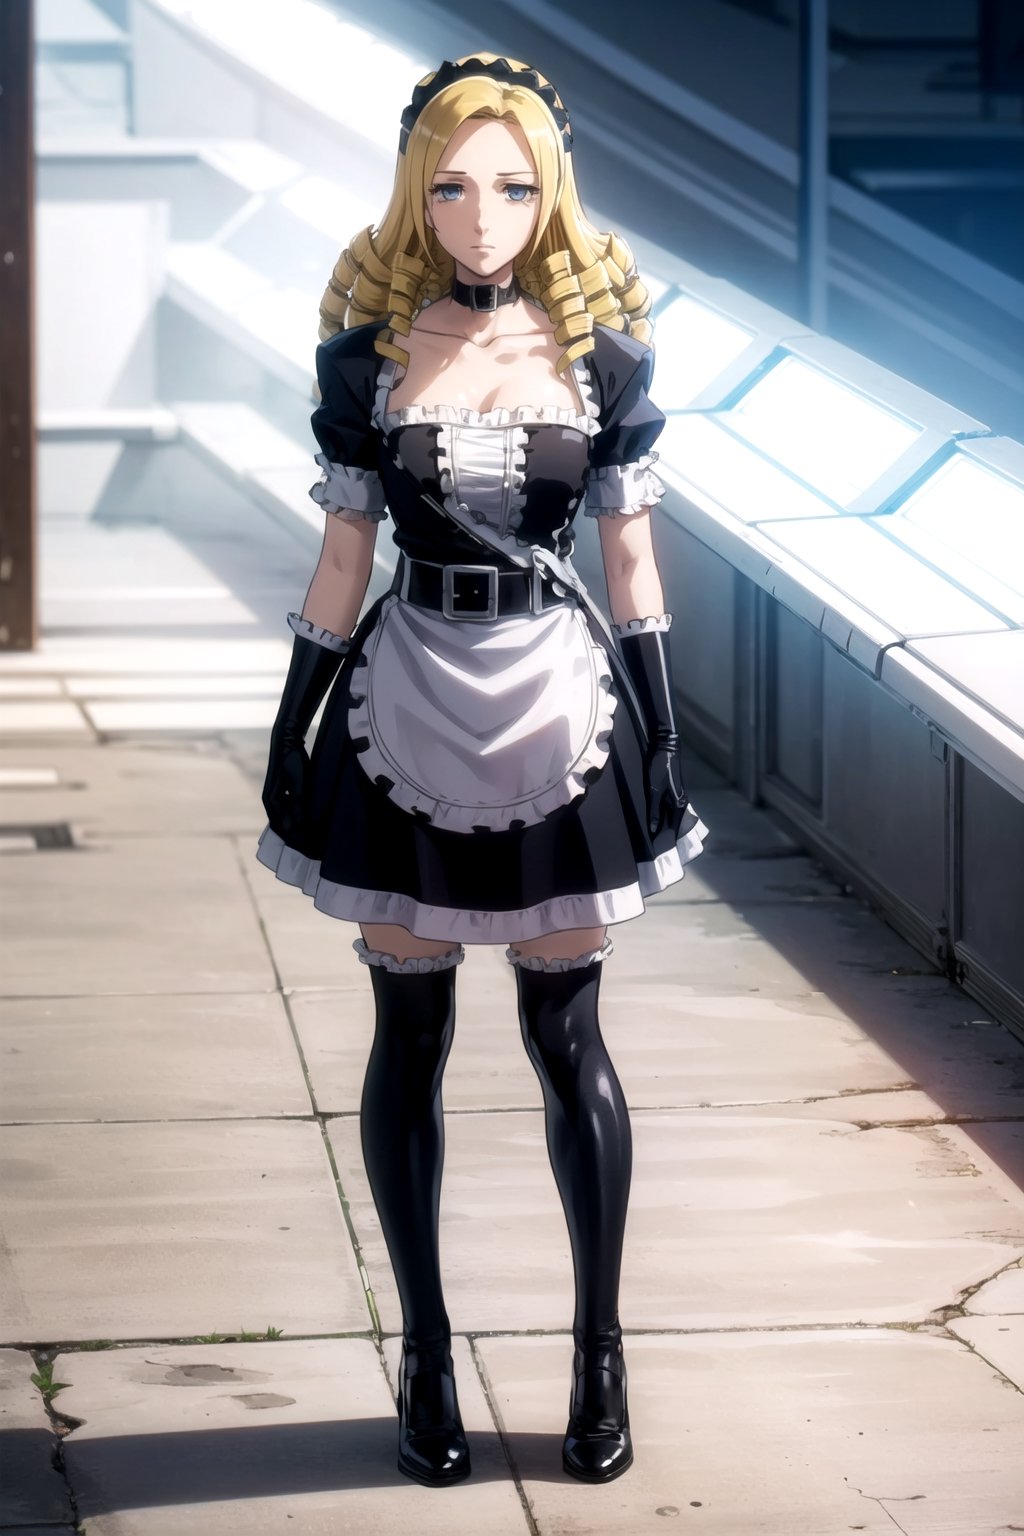 //Quality,
masterpiece, best quality
,//Character,
1girl, solo
,//Fashion,
,//Background,
white_background
,//Others,
,solution epsilon, maid, maid headdress, choker, elbow gloves, full_body